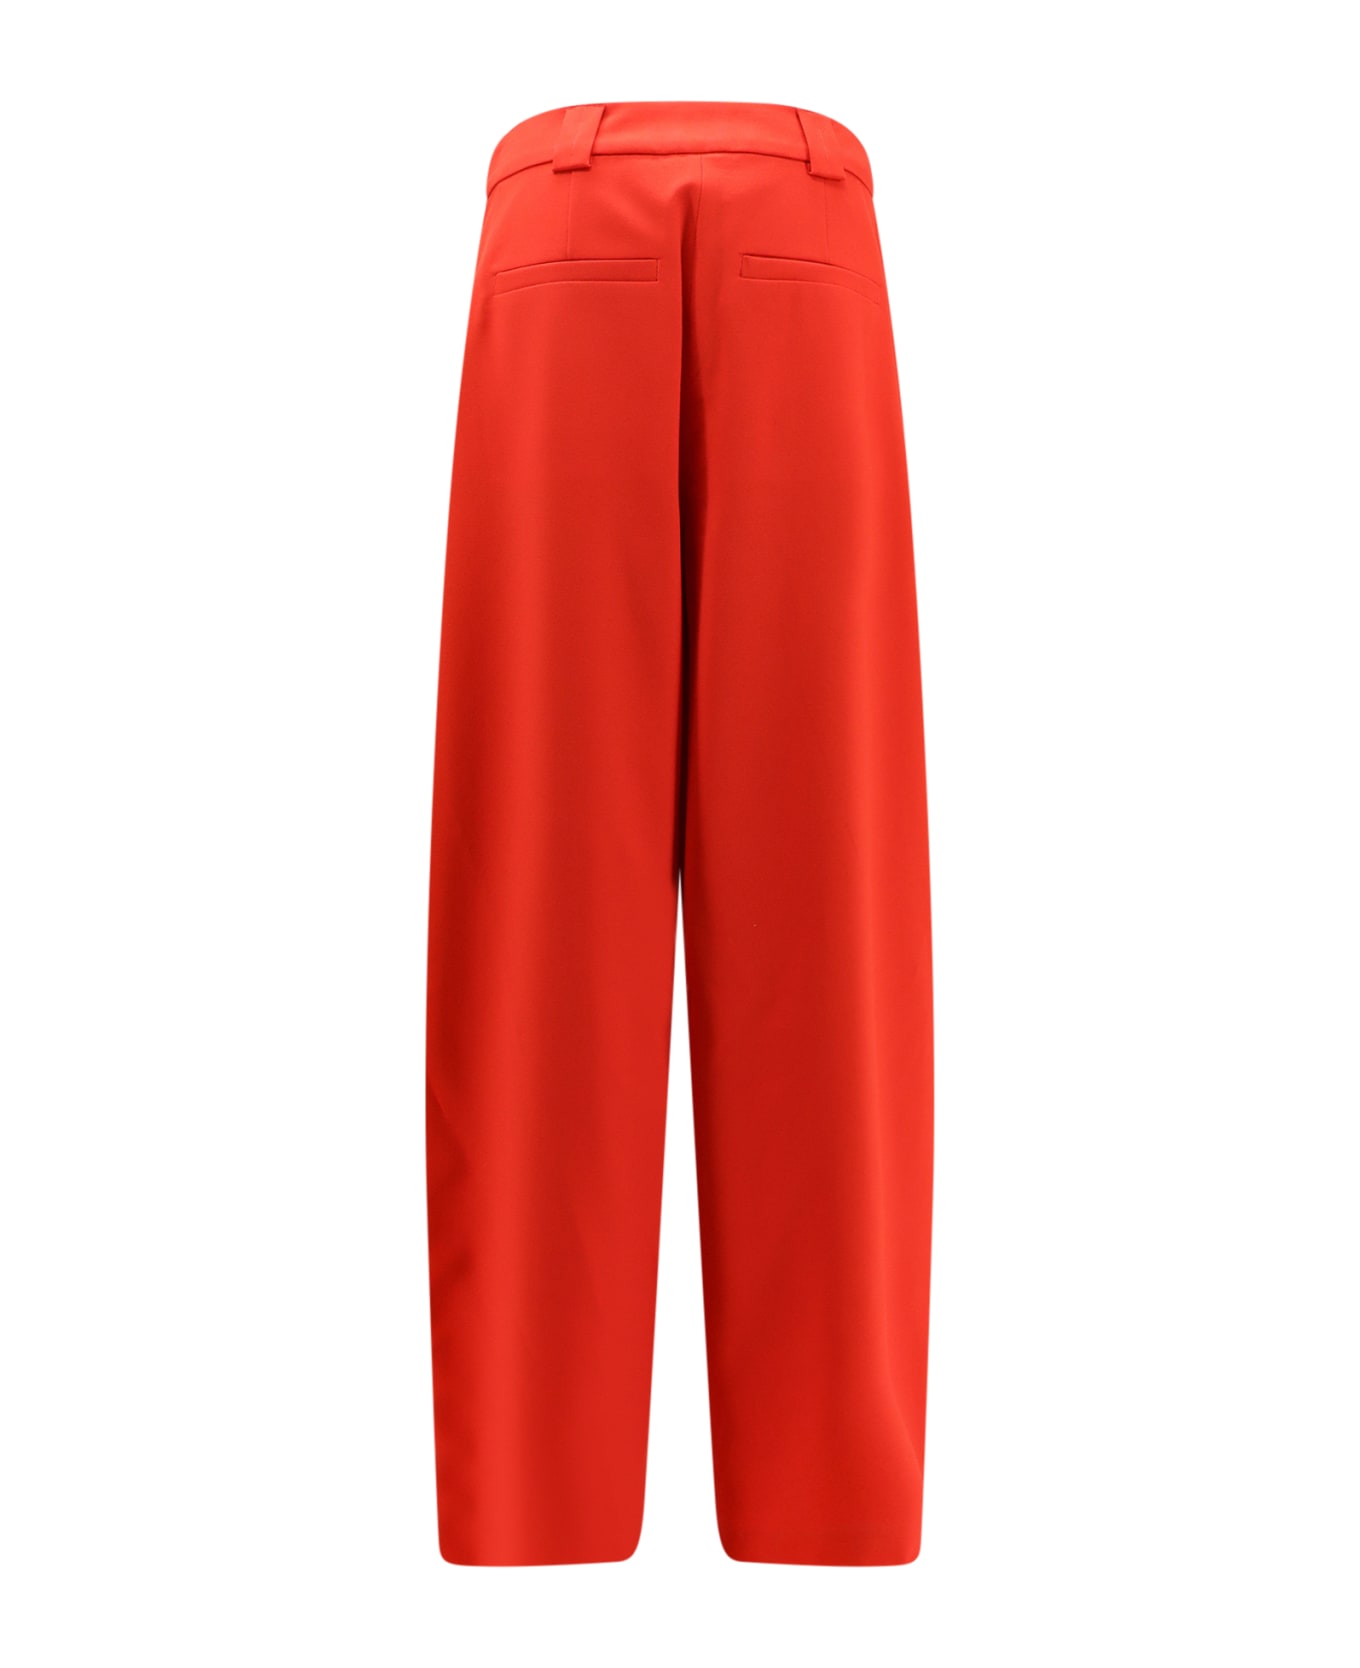 Closed Trouser - Red